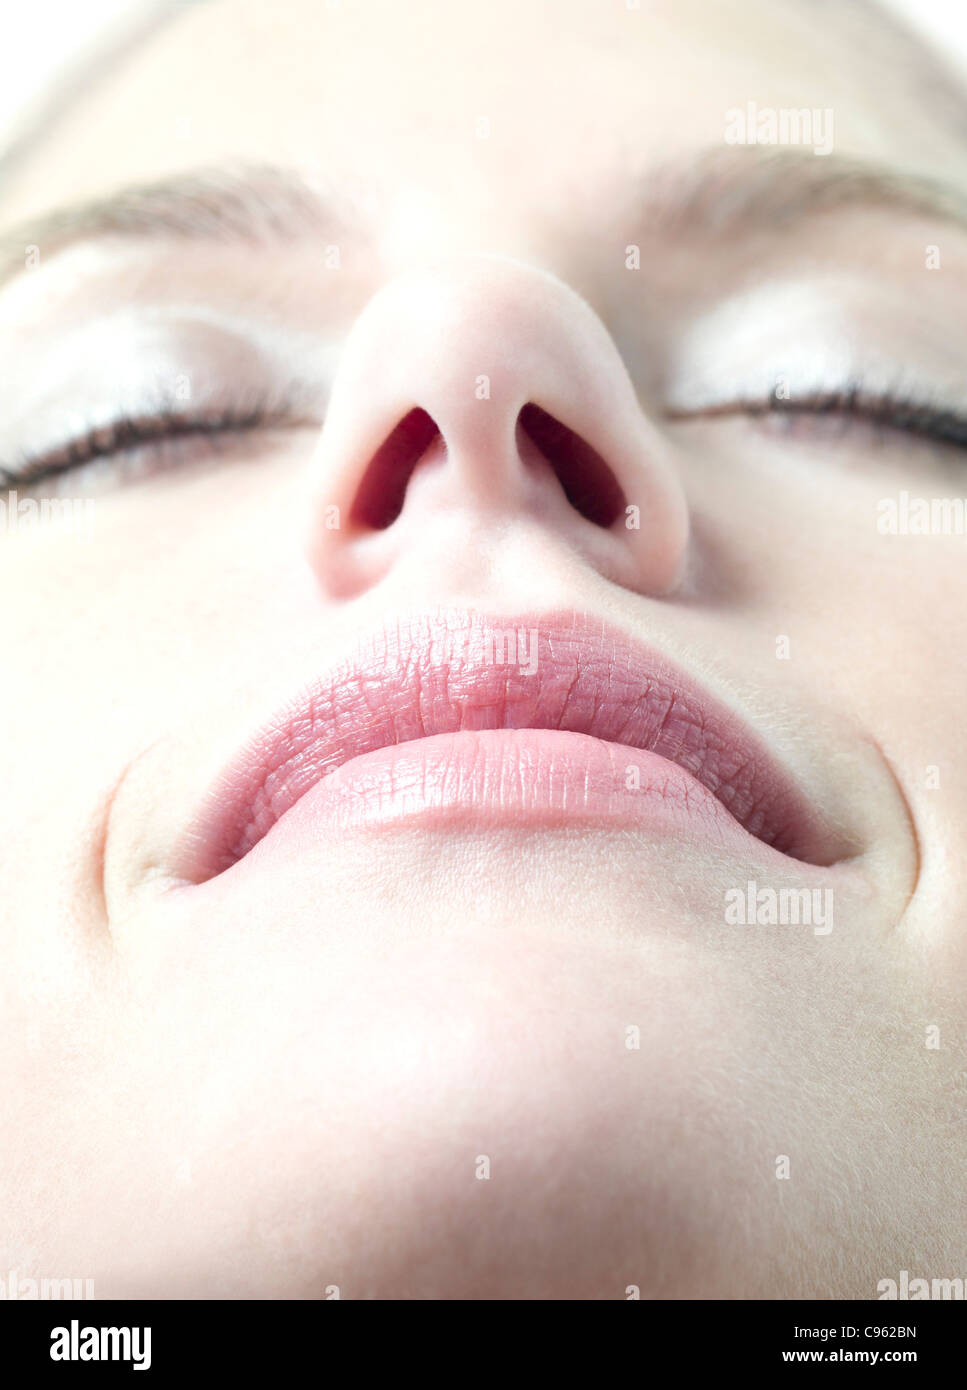 Healthy woman's face. Stock Photo